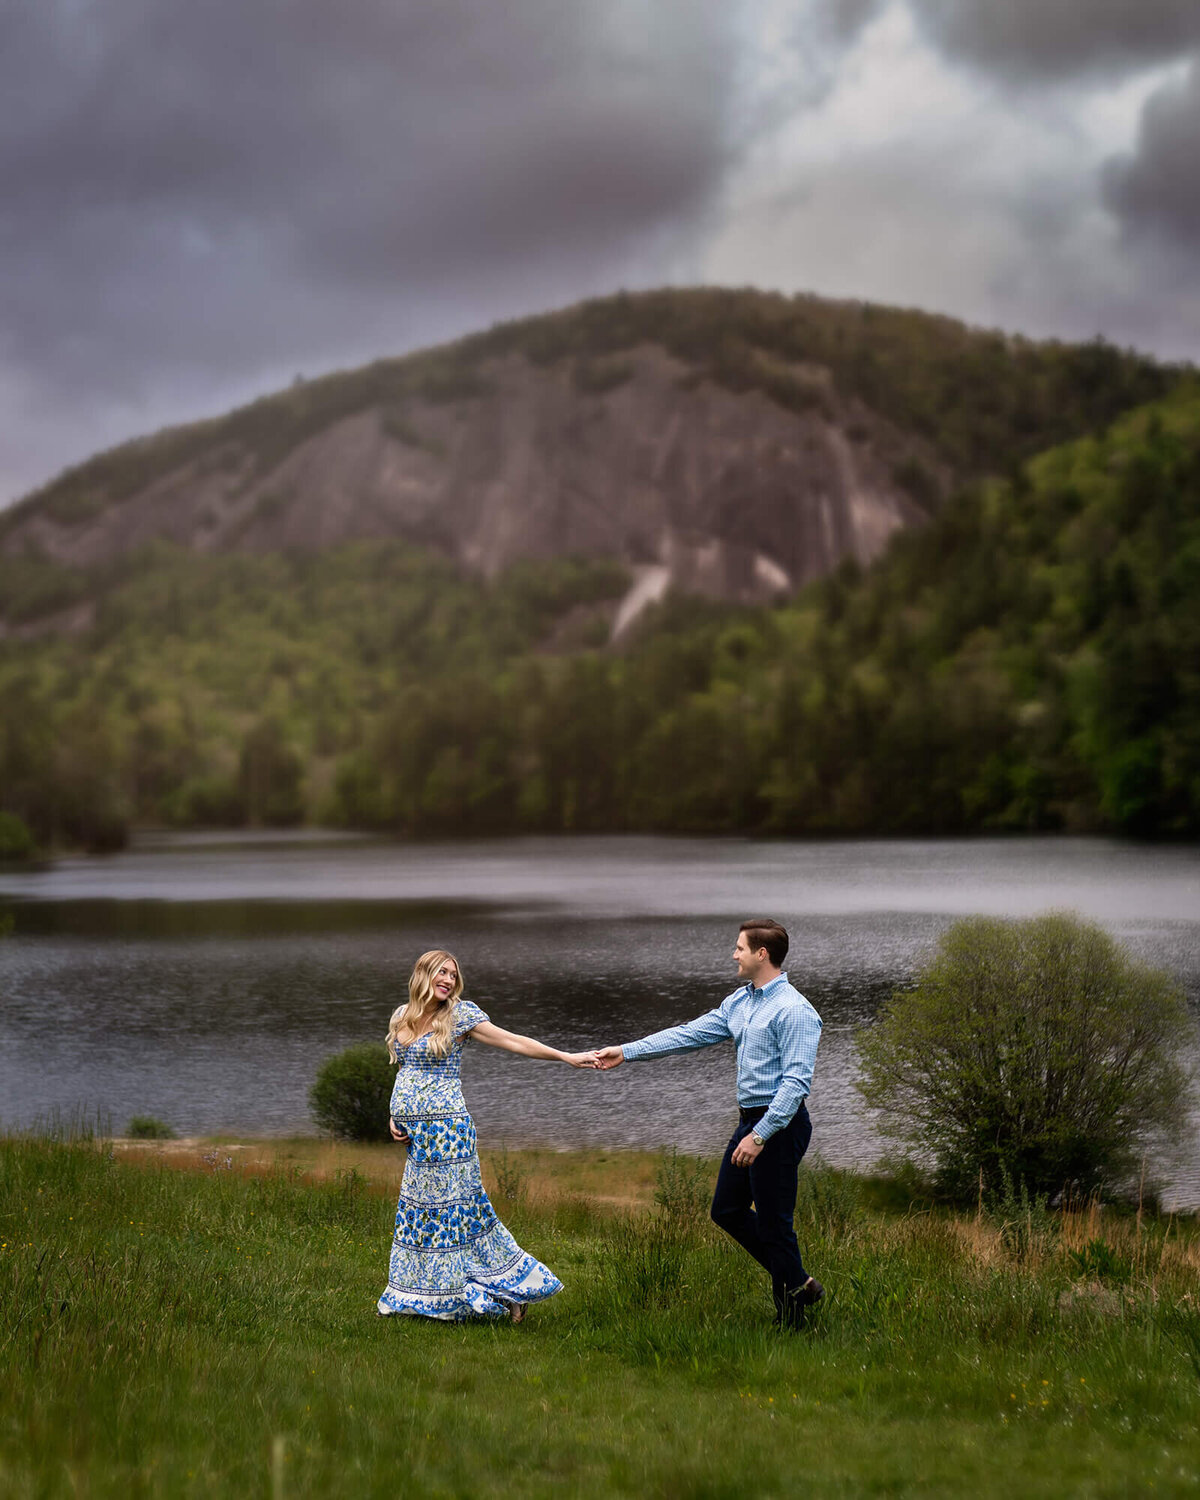 An expecting couple walks through a scenic park with mountains in the background